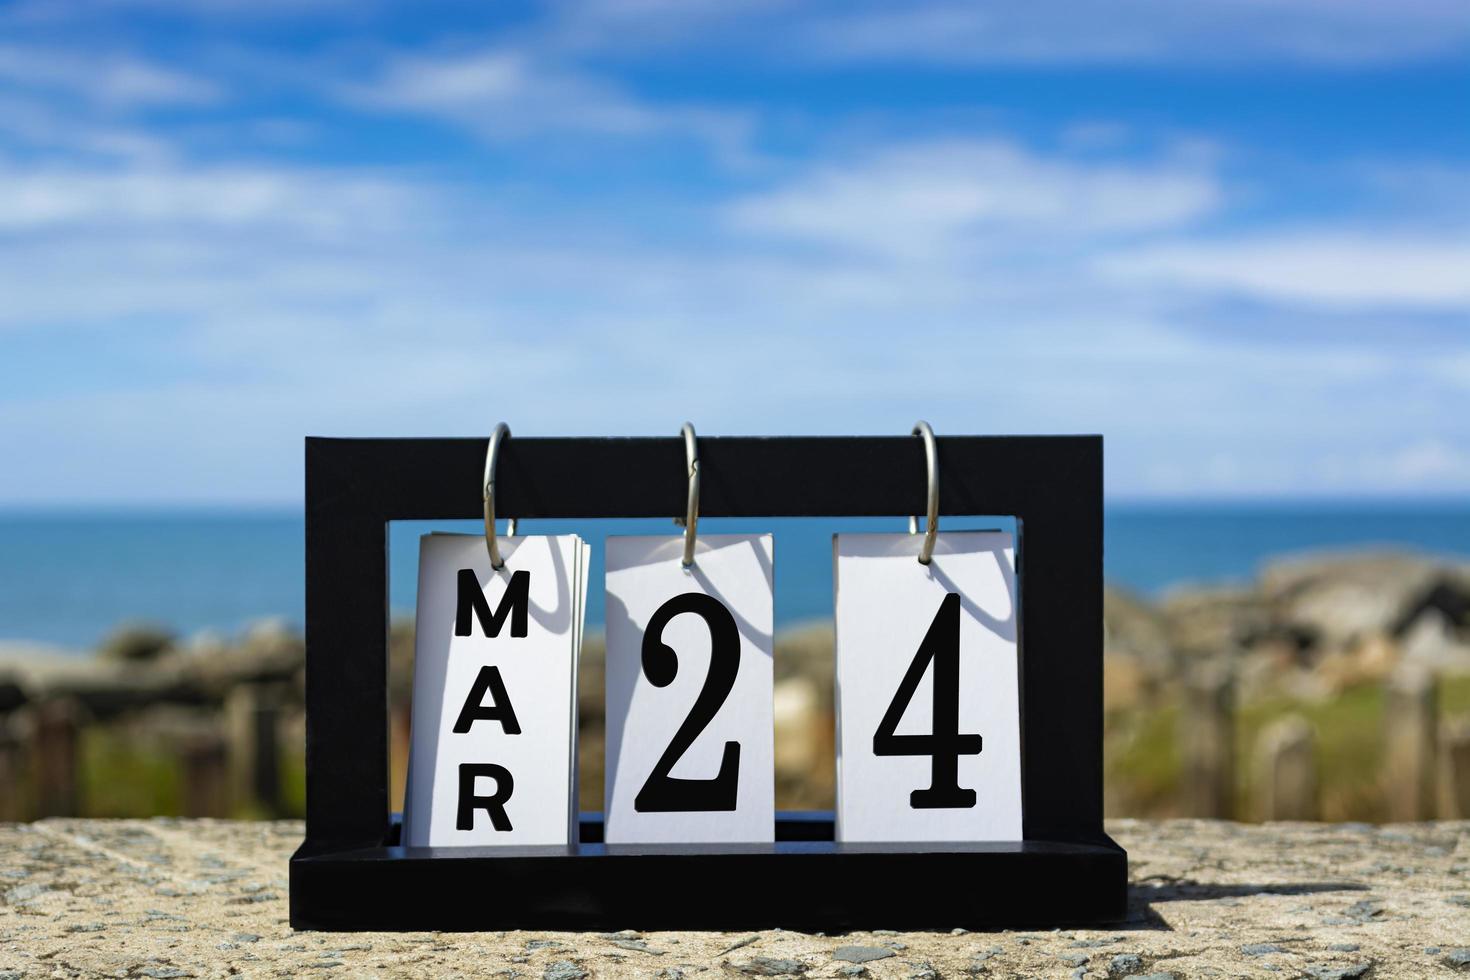 Mar 24 calendar date text on wooden frame with blurred background of ocean. photo